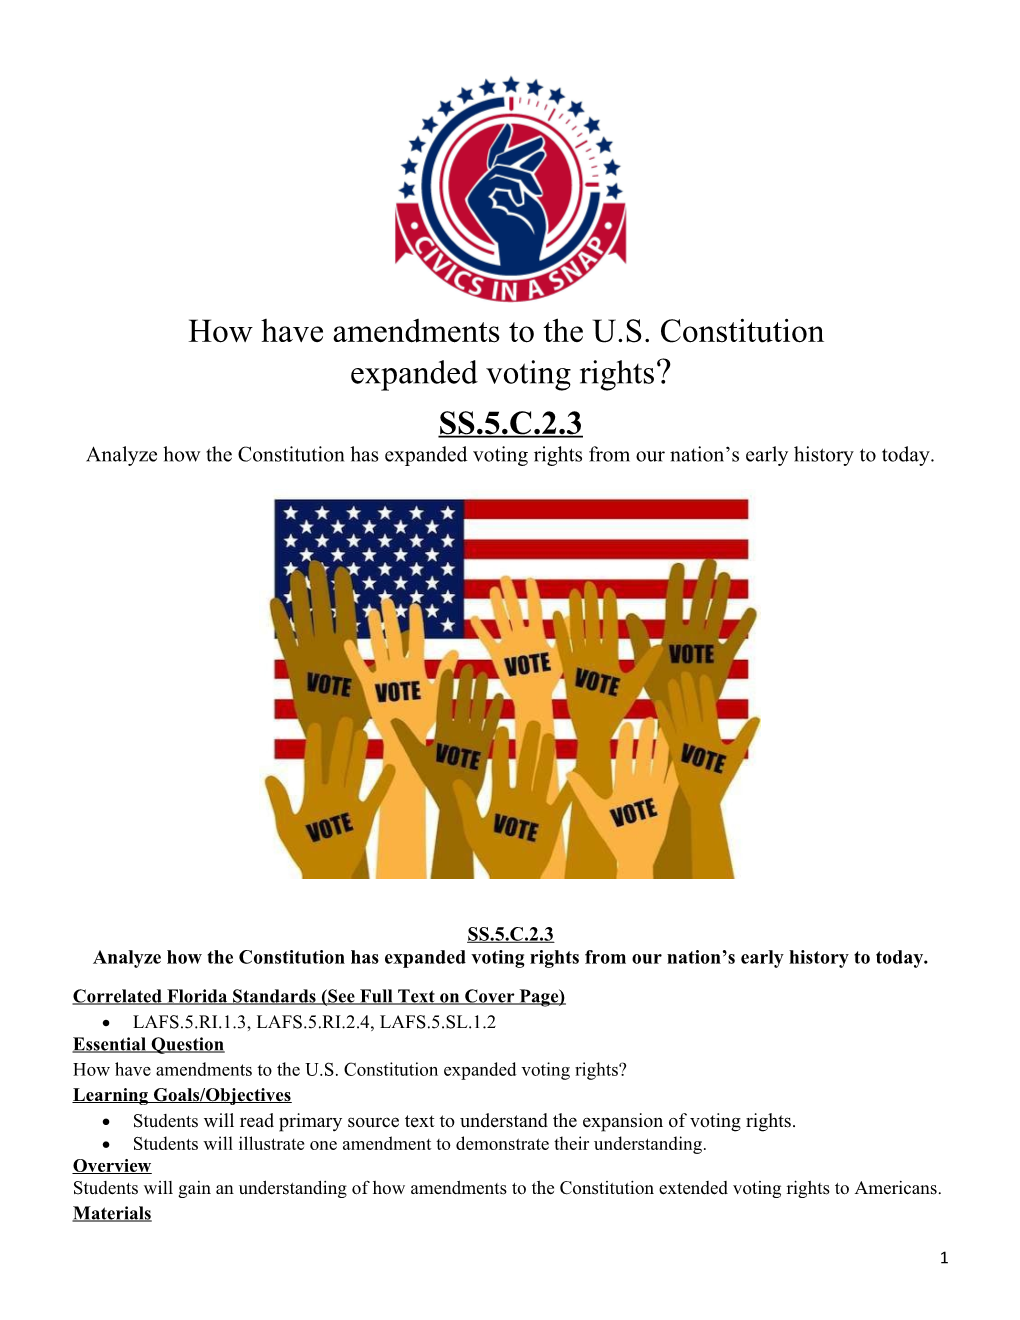 How Have Amendments to the U.S. Constitution